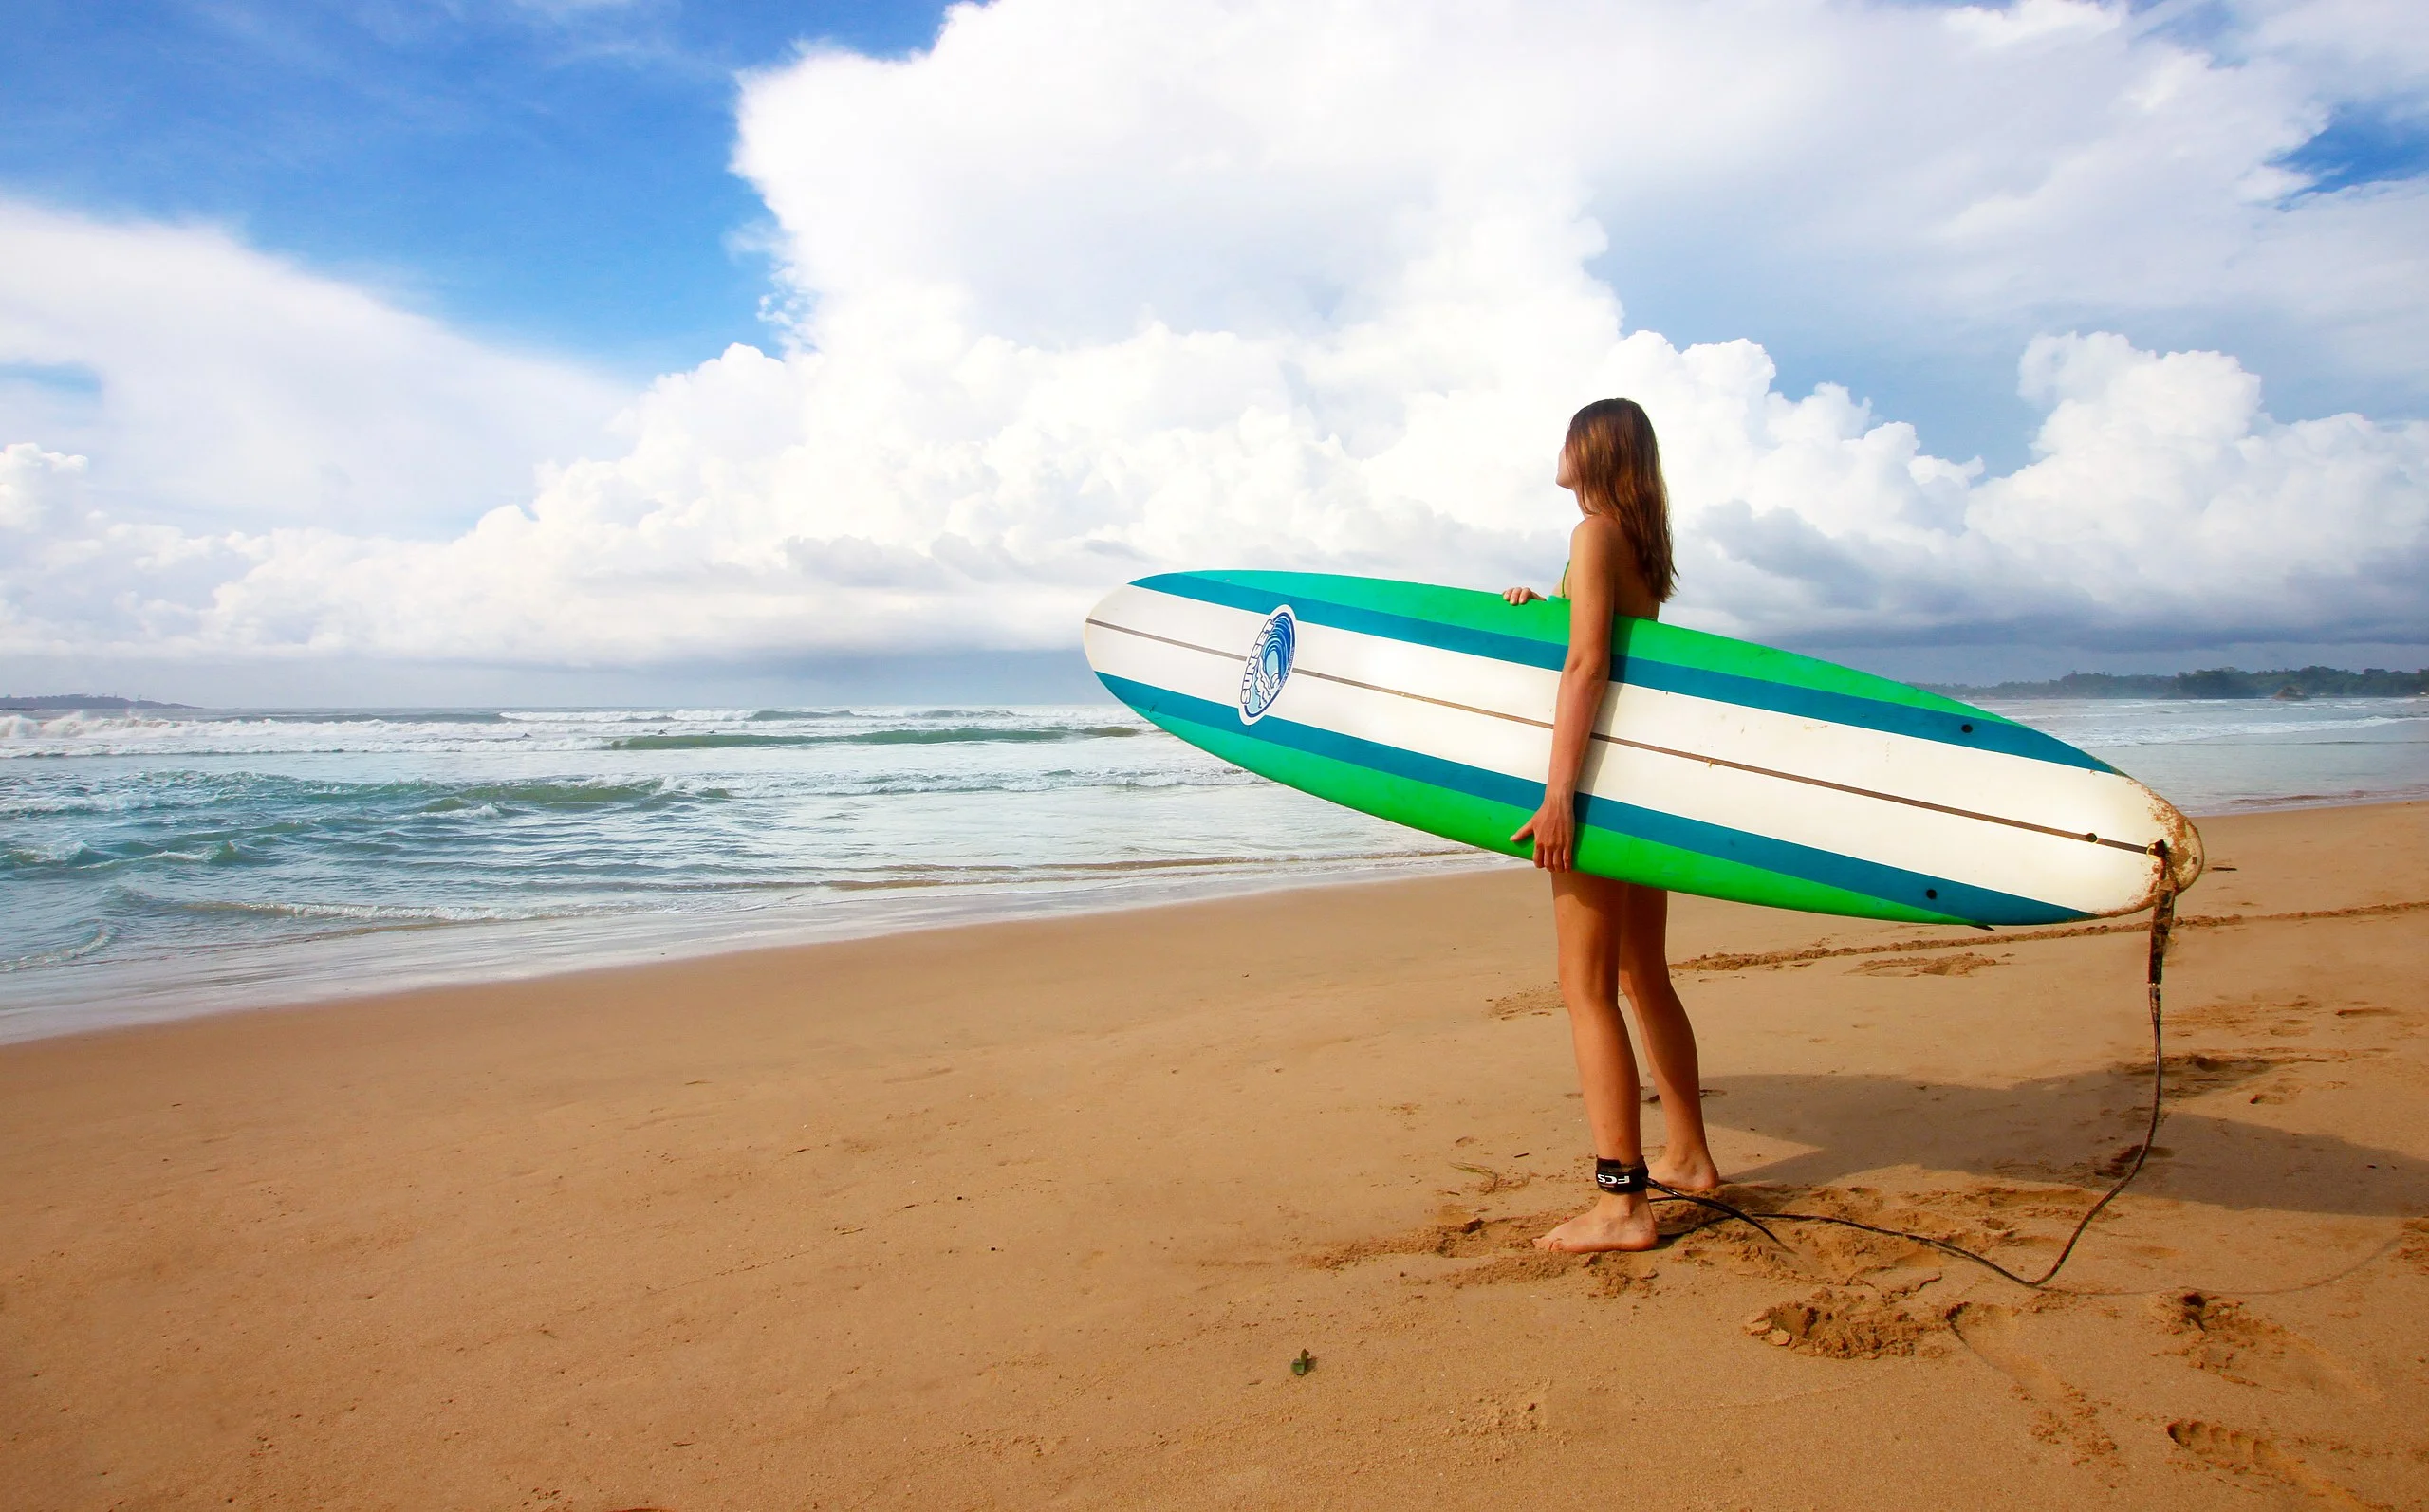 weligama beach is ideal for surfing